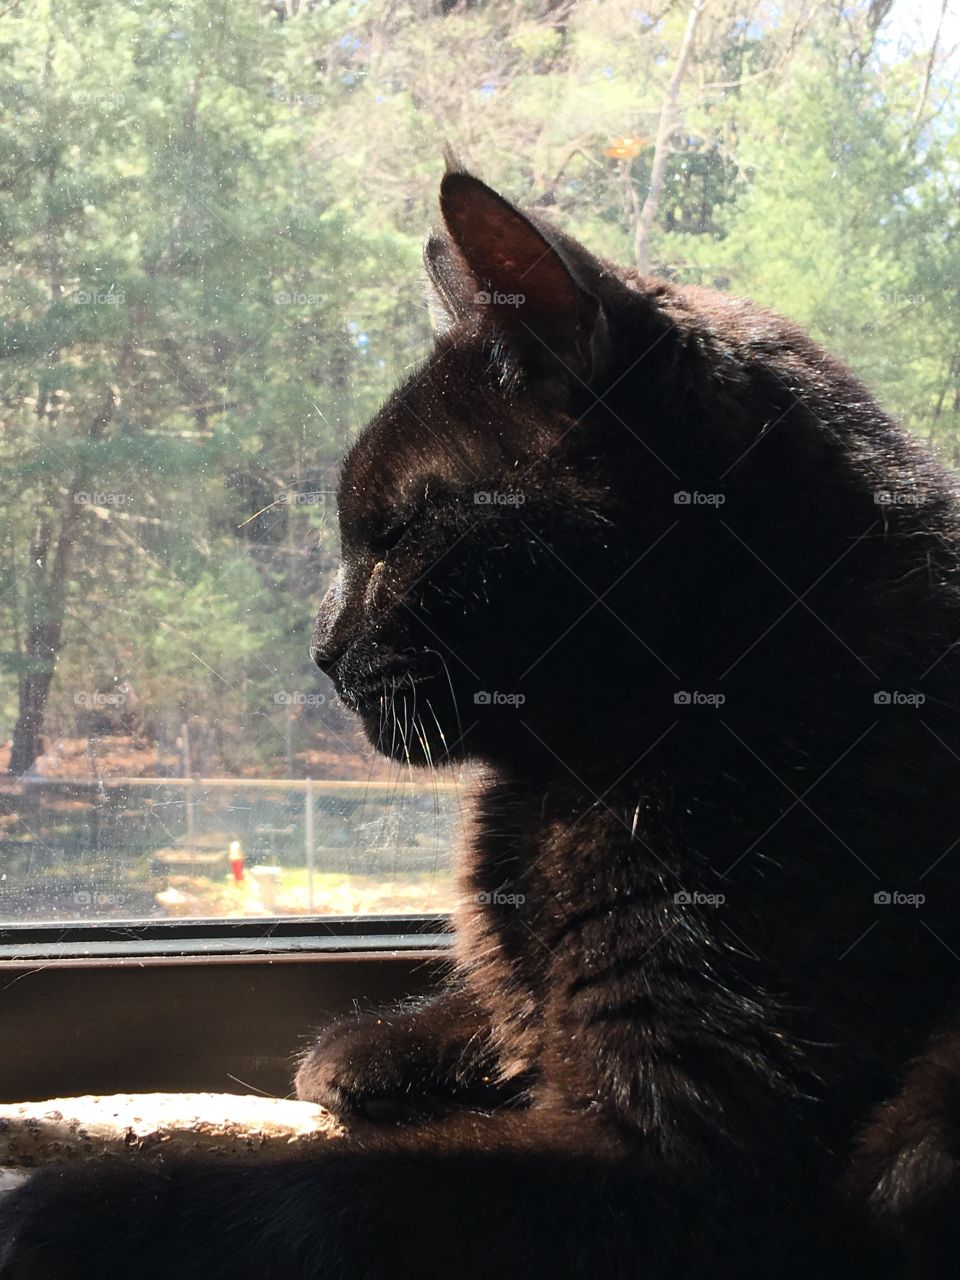 Black Cat Upper Body Profile In Window

My kitty looking intently at something while sitting in the kitchen window sunshine! 🐾 
You can see our woods in the background.